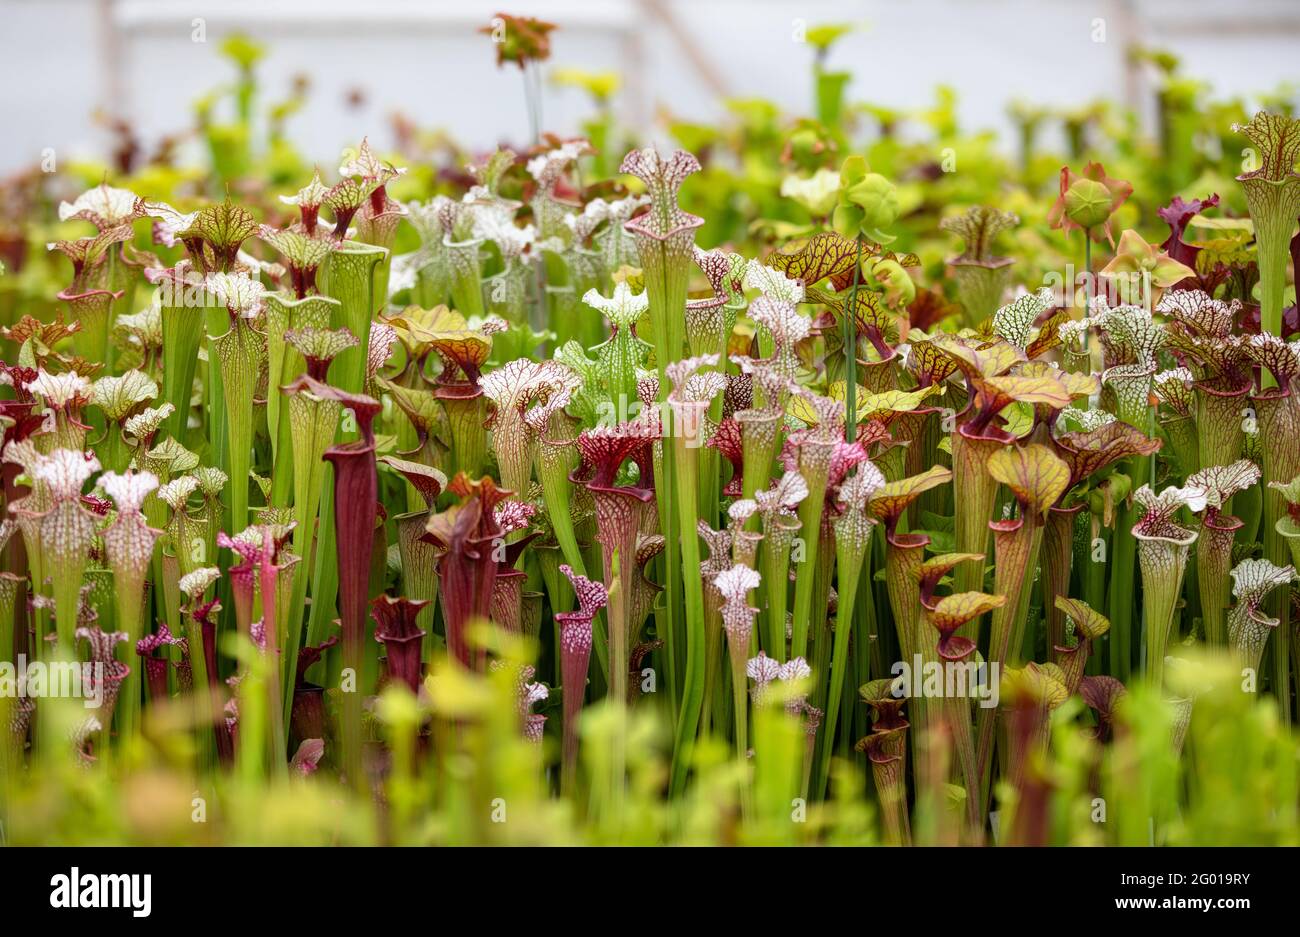 https://c8.alamy.com/comp/2G019RY/ludwigsburg-germany-27th-may-2021-carnivorous-plants-of-the-species-sarracenia-hybrids-grow-in-a-greenhouse-plundering-habitat-destruction-overfertilization-for-various-reasons-carnivorous-plants-are-threatened-worldwide-to-dpa-toilet-bowl-and-glue-trap-does-breeding-save-carnivorous-plants-credit-christoph-schmidtdpaalamy-live-news-2G019RY.jpg